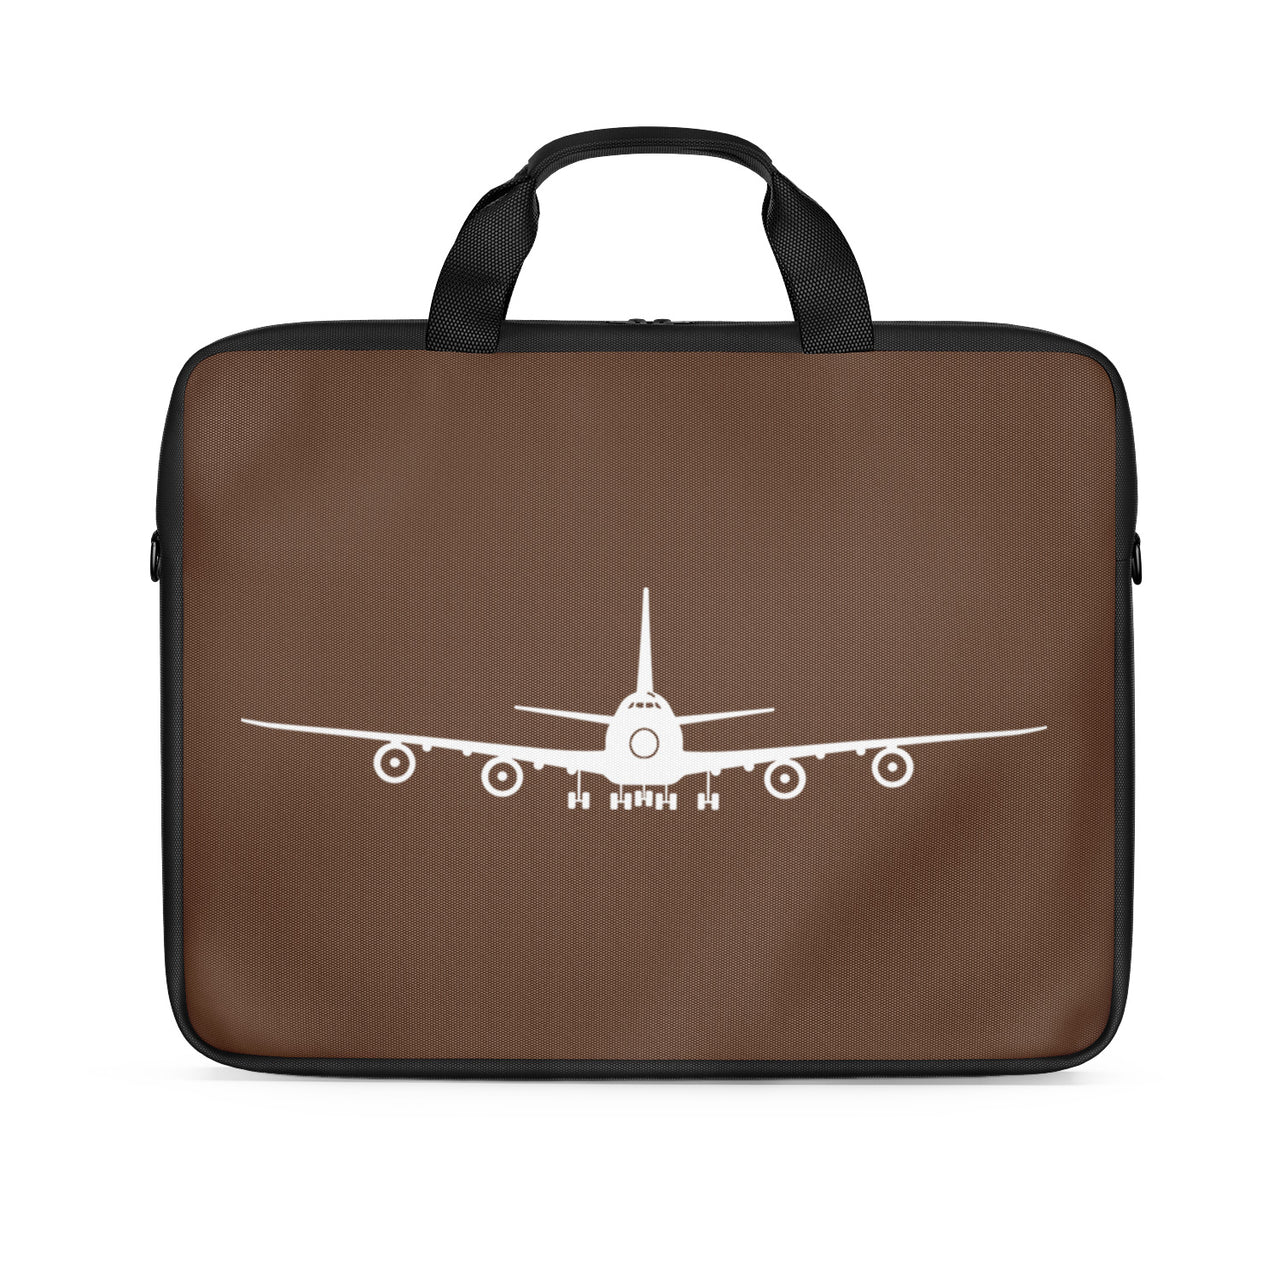 Boeing 747 Silhouette Designed Laptop & Tablet Bags